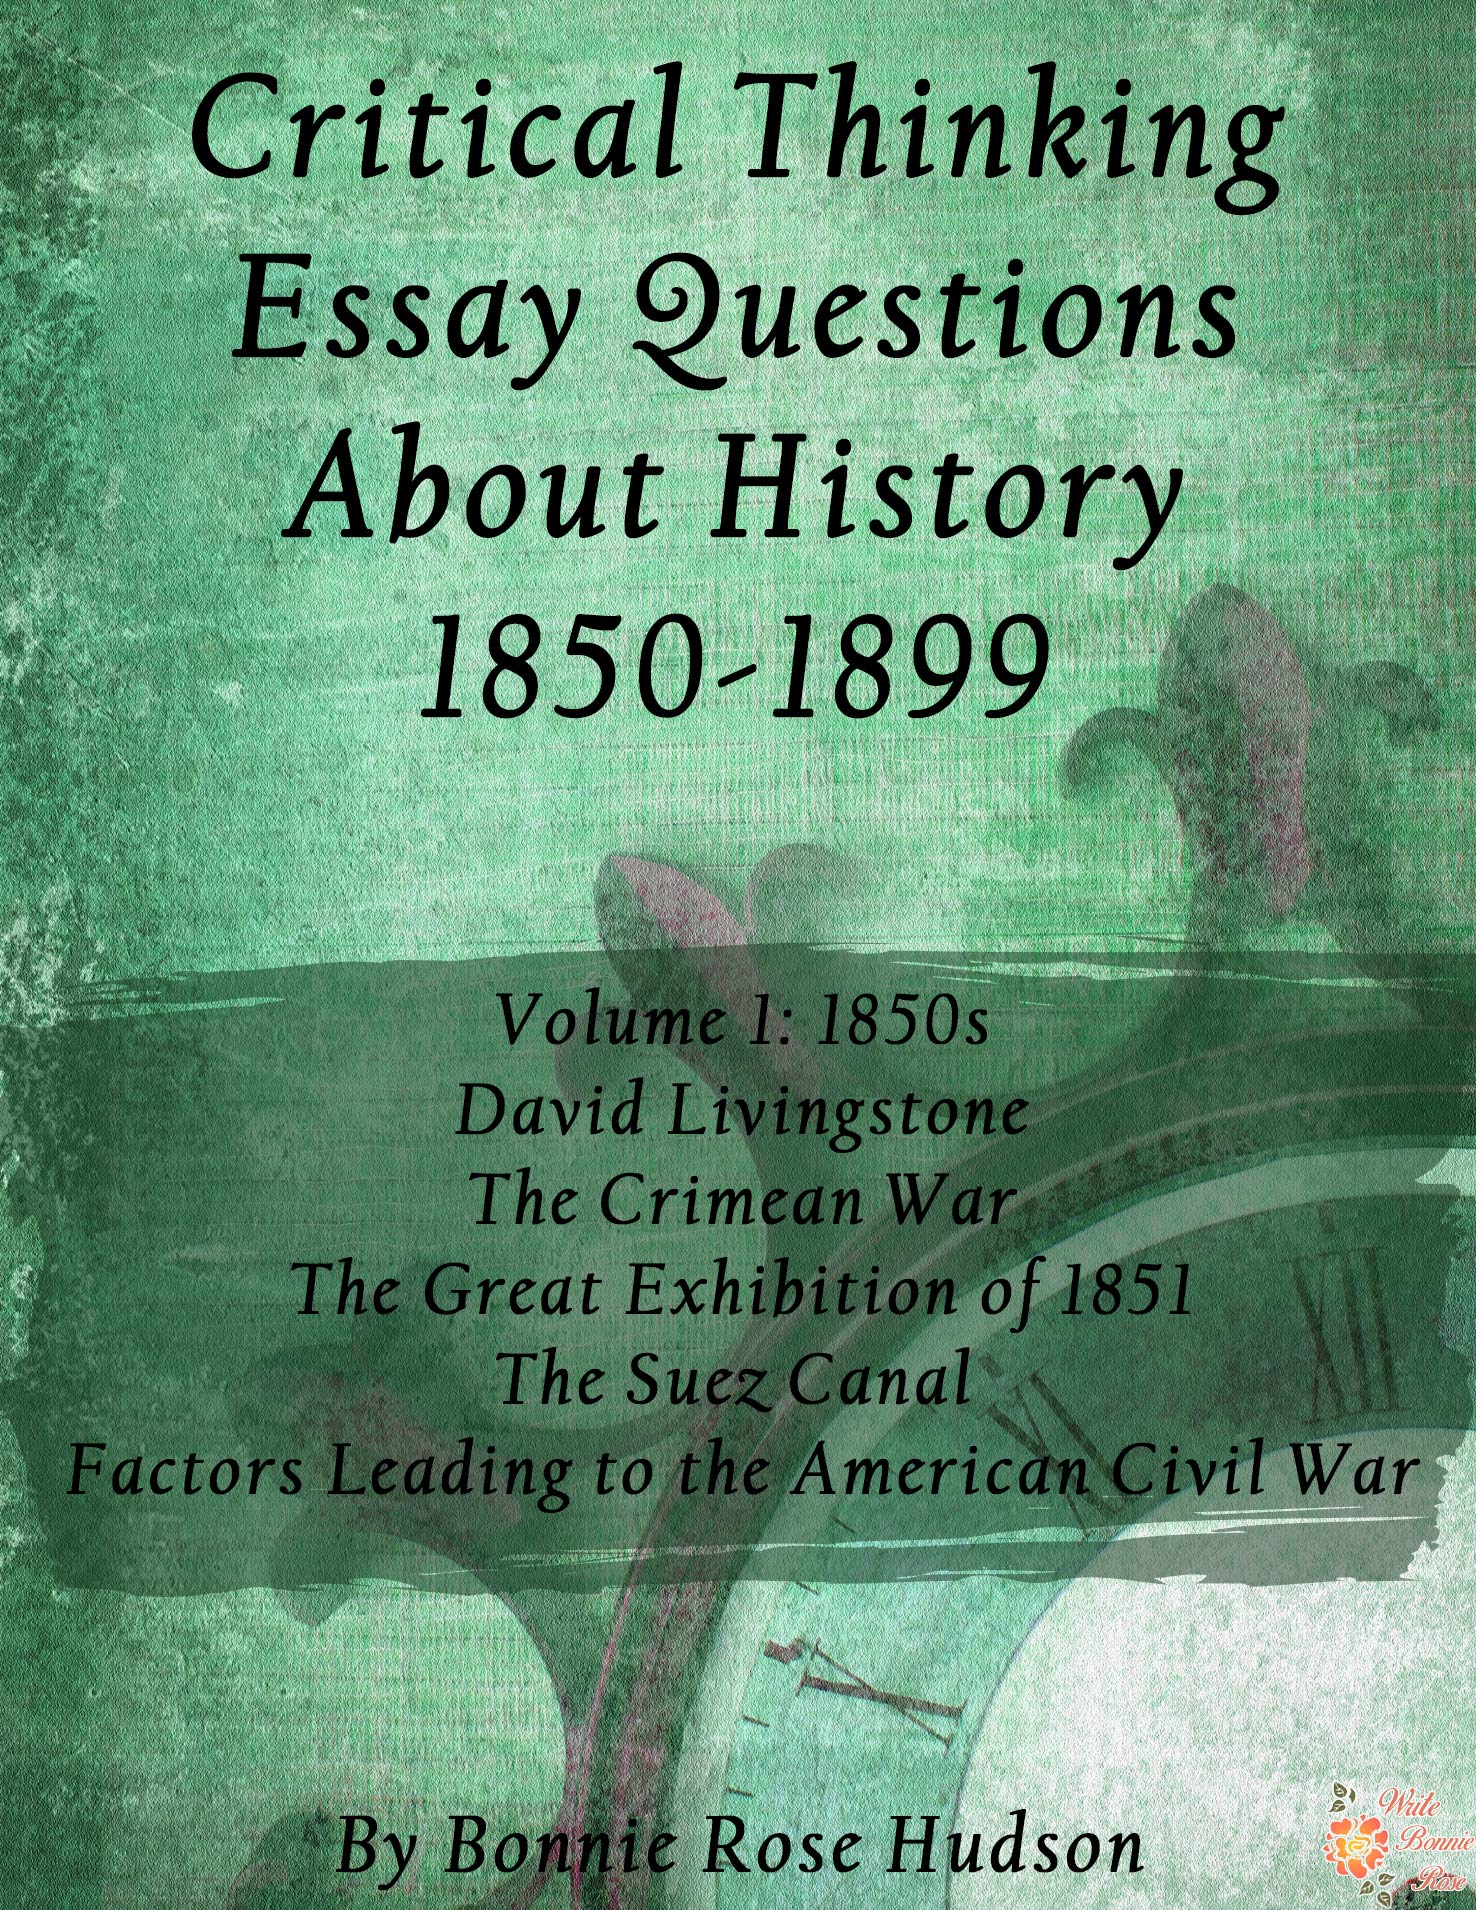 FREE Critical Thinking Essay Questions About History 1850-1899, Volume 1